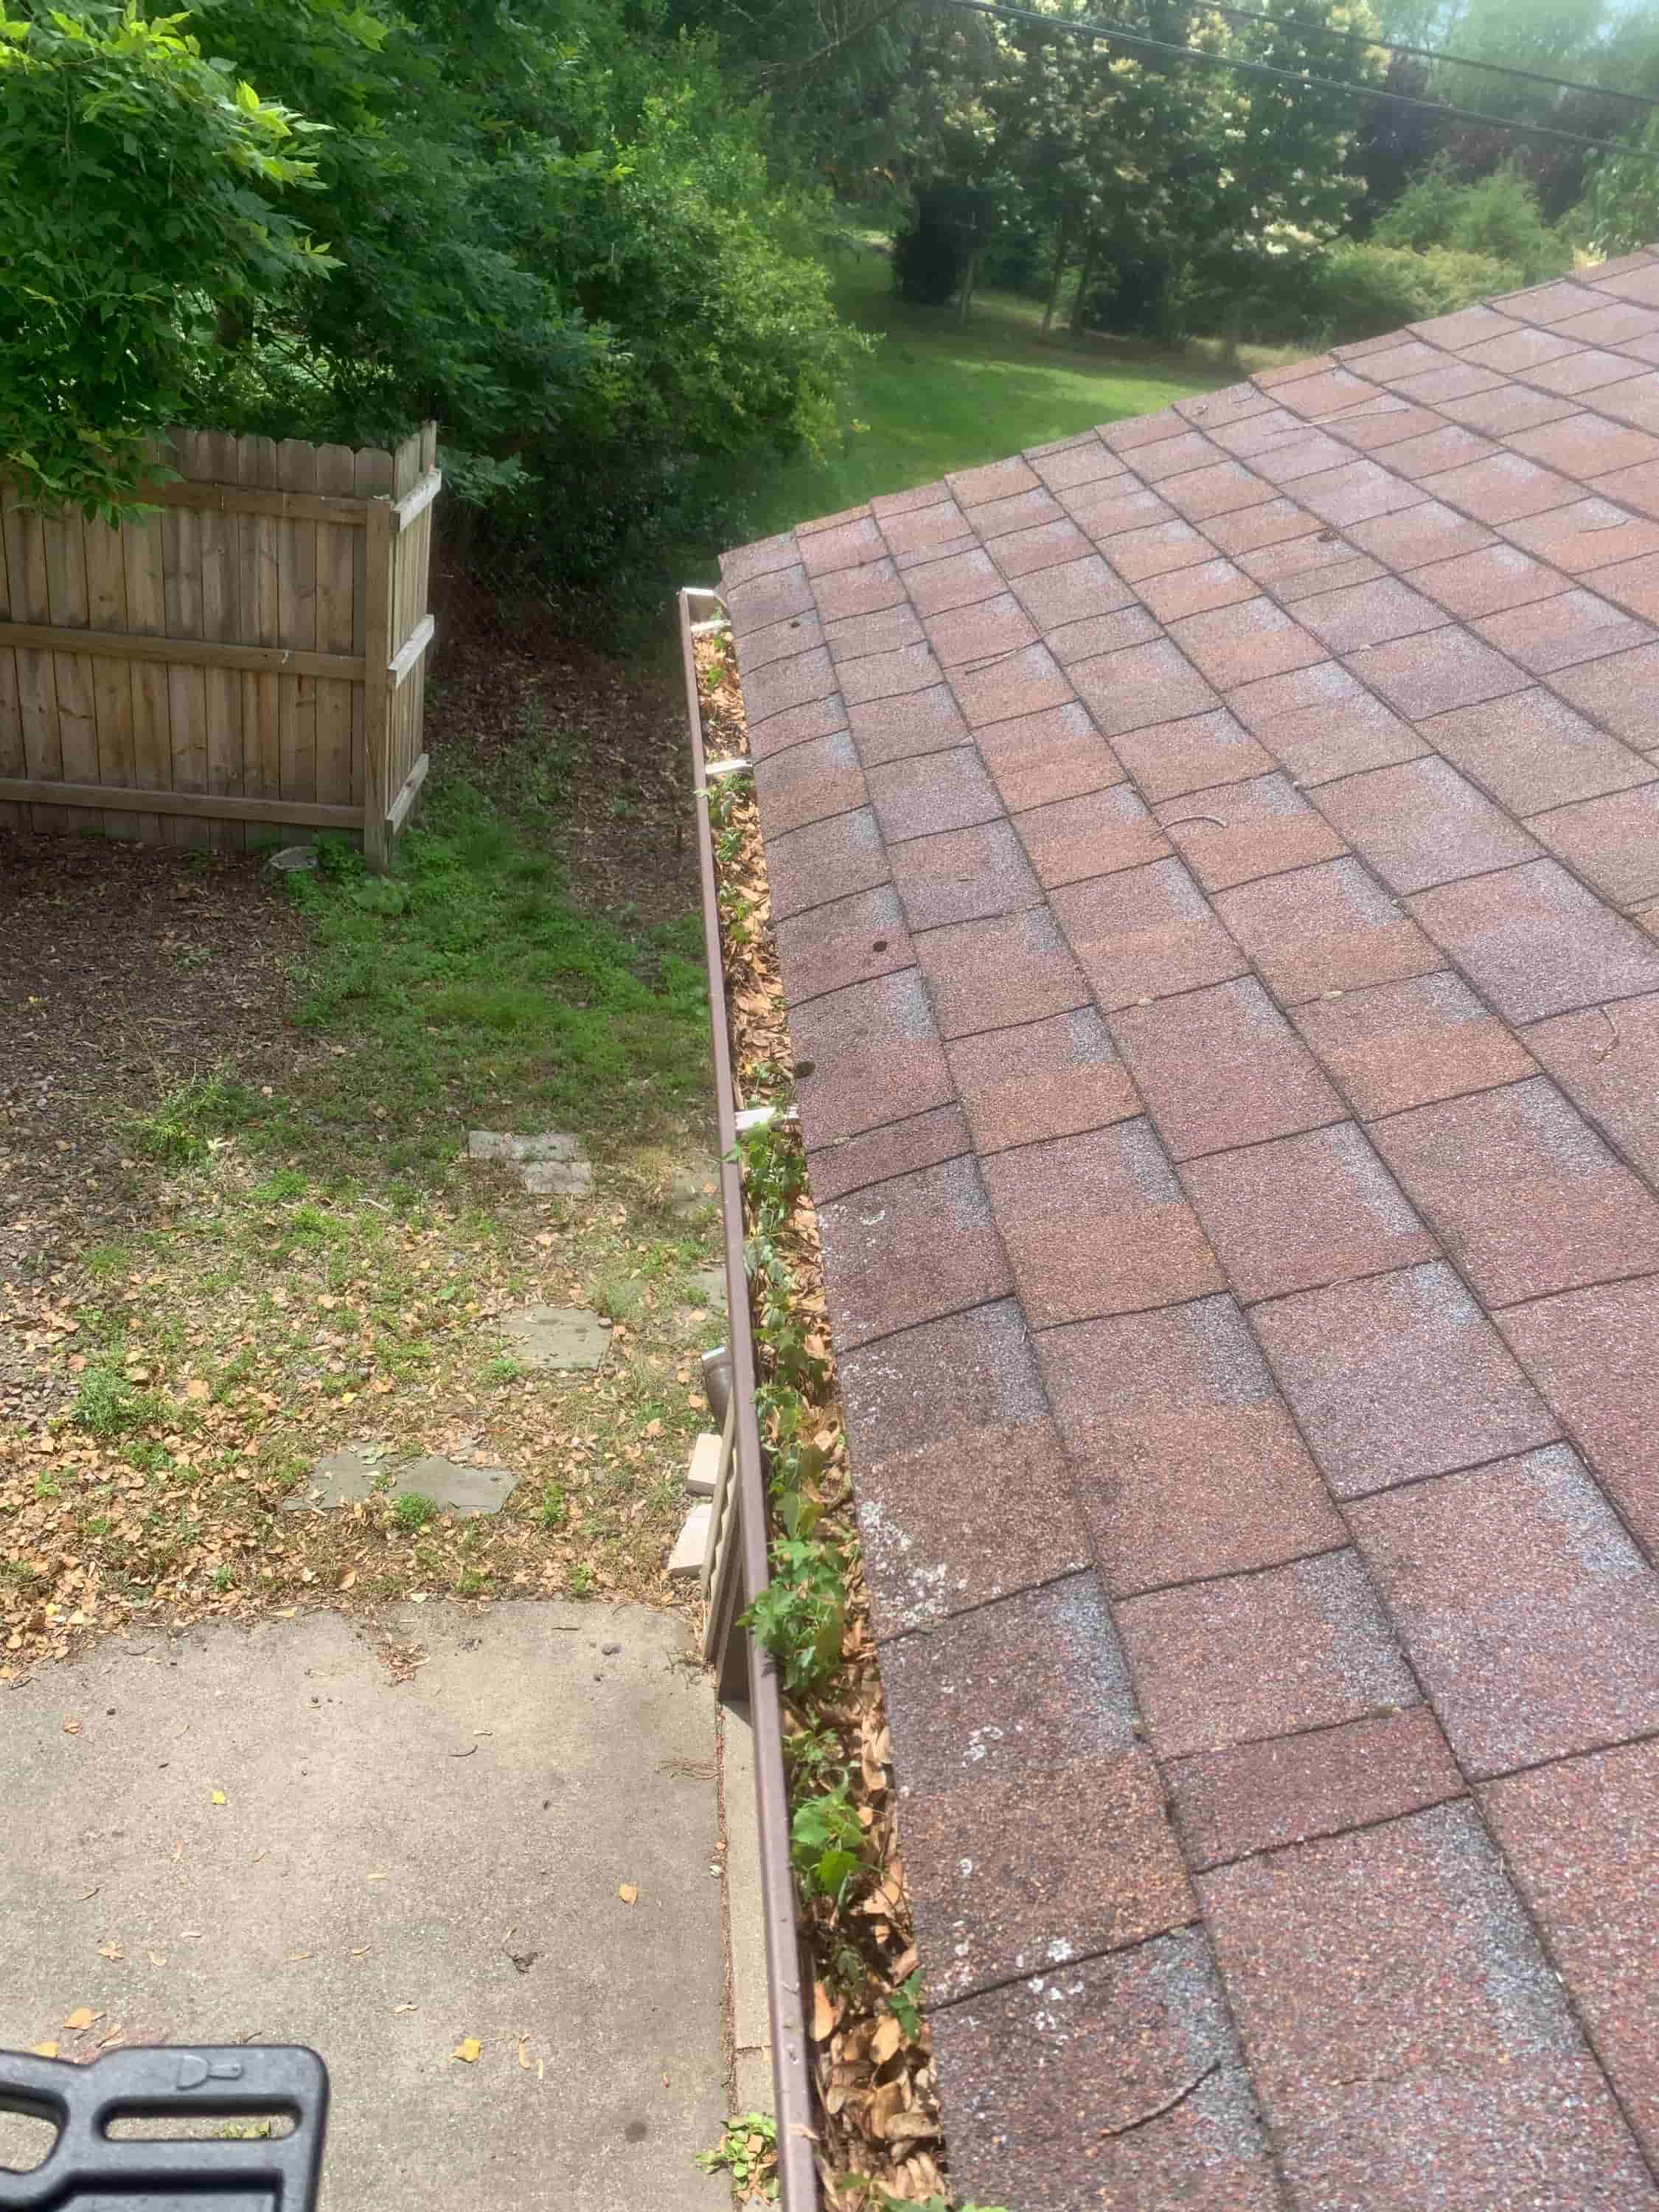 fastest way to clean gutters